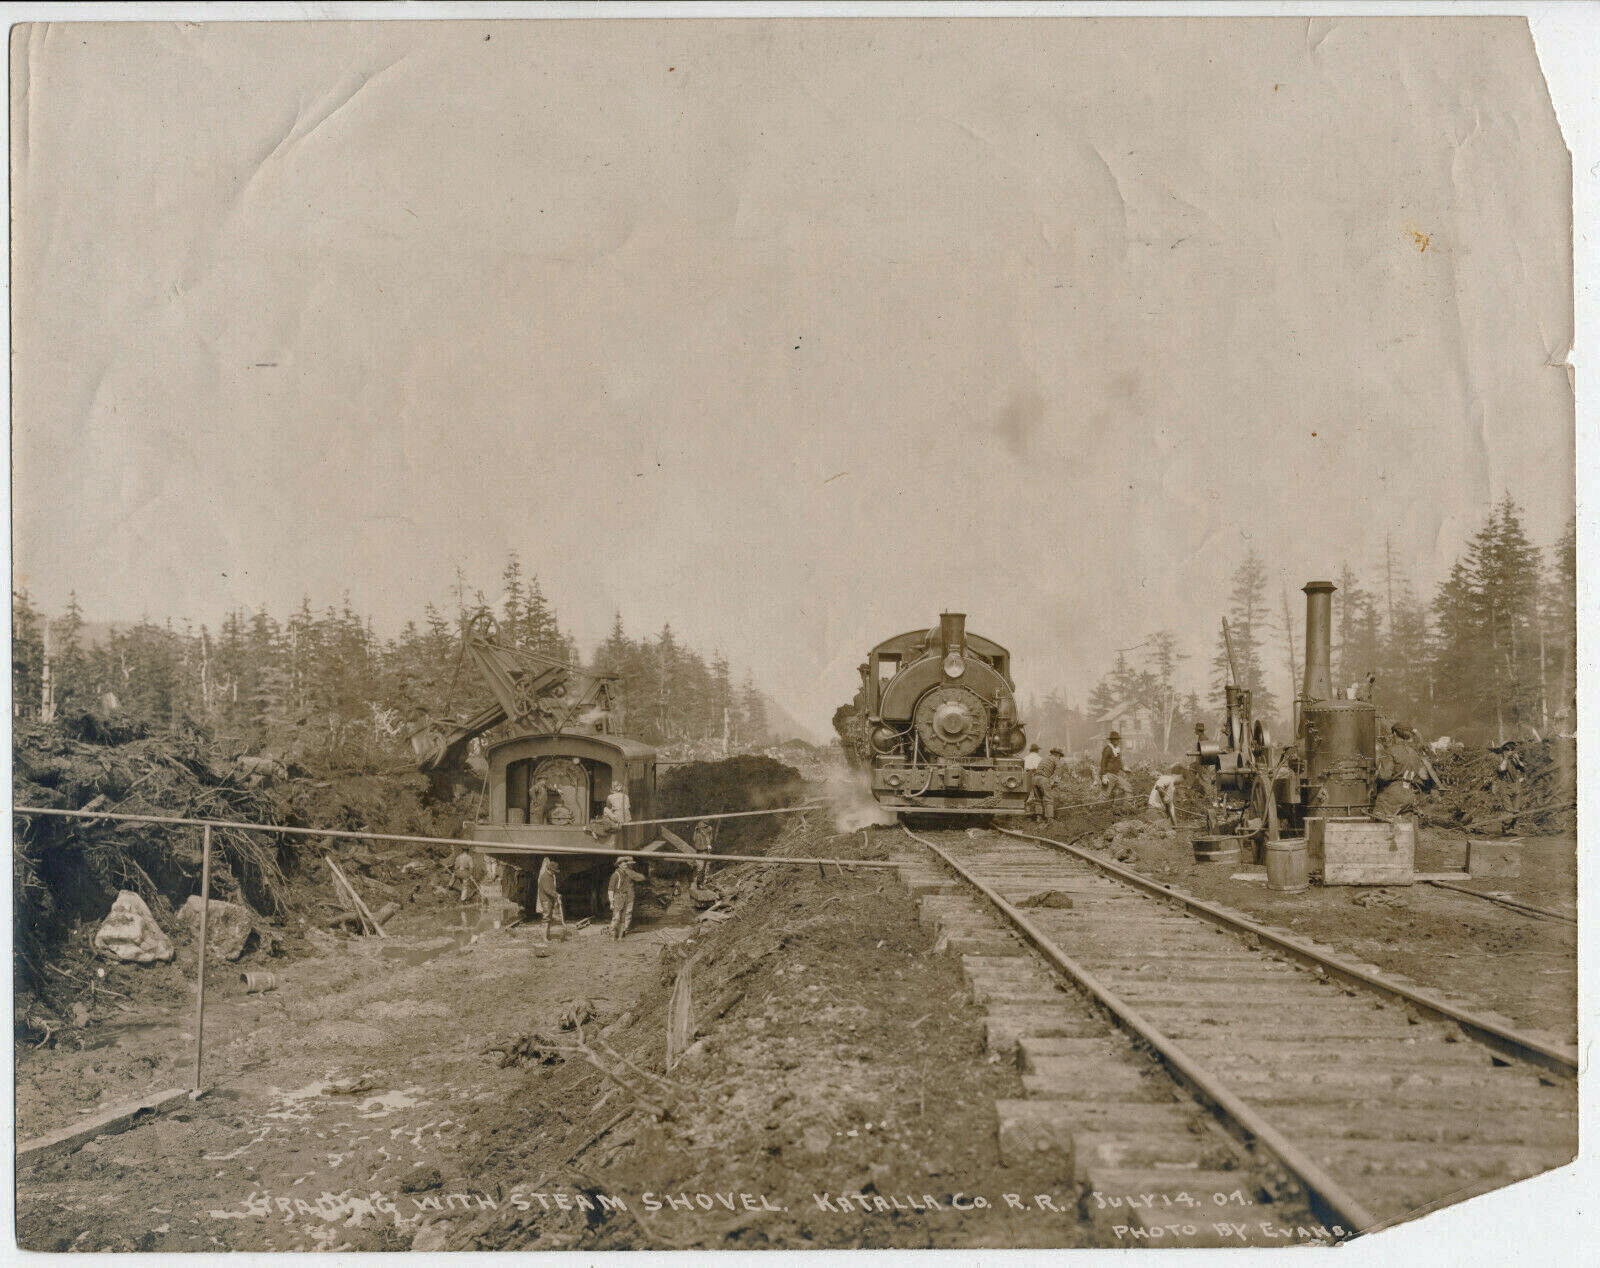 For sale: Original 1907 photograph of the Katalla
              Coal Railroad grading and engine and men.